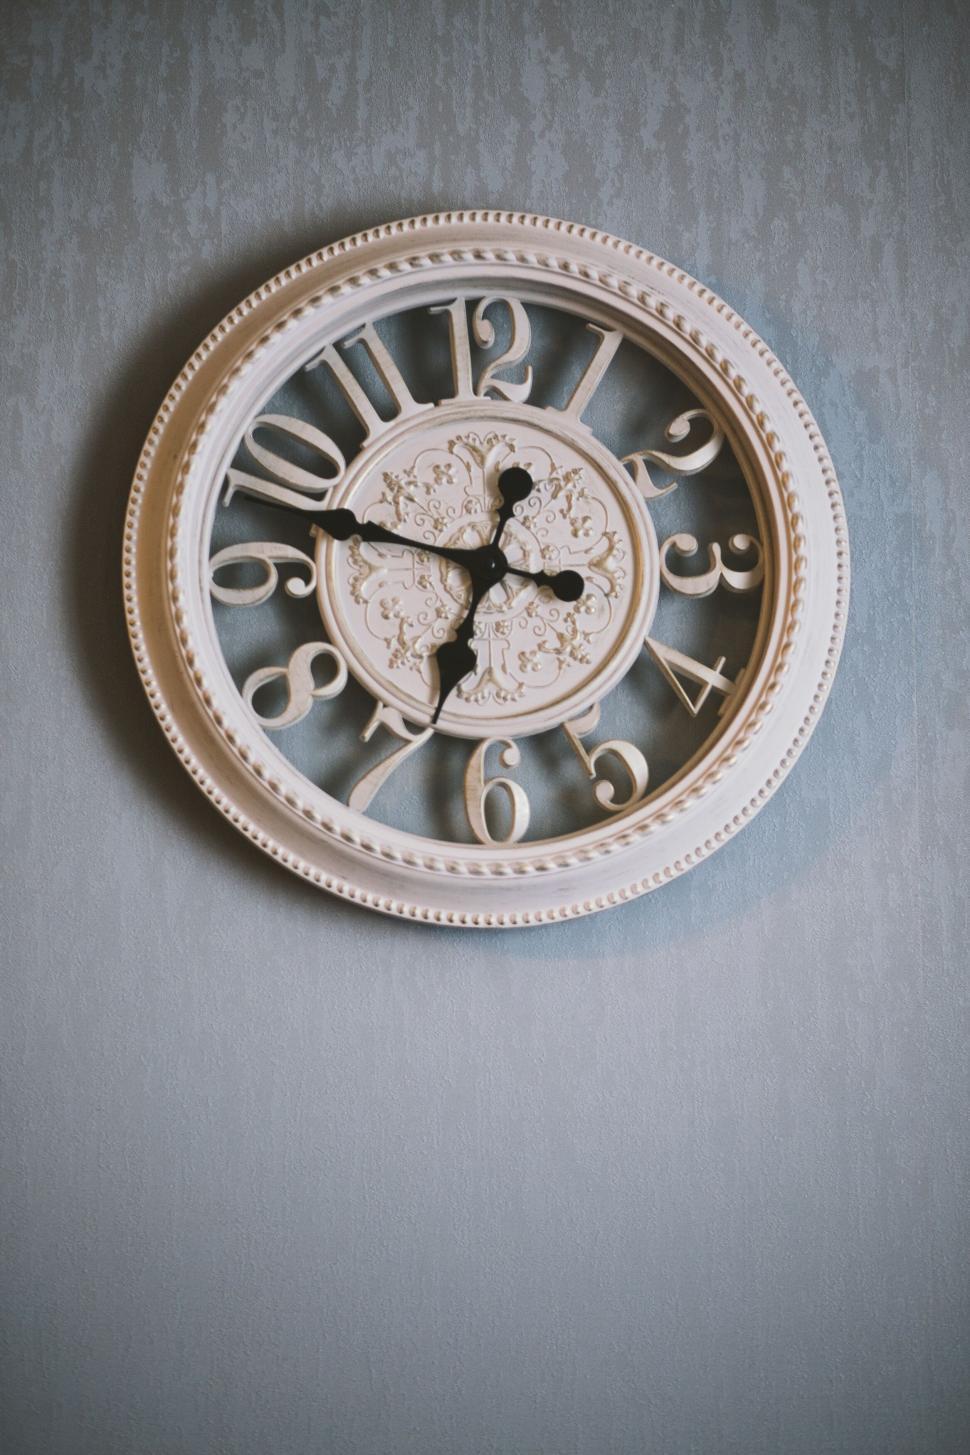 Free Image of Antique wall clock with Roman numerals 